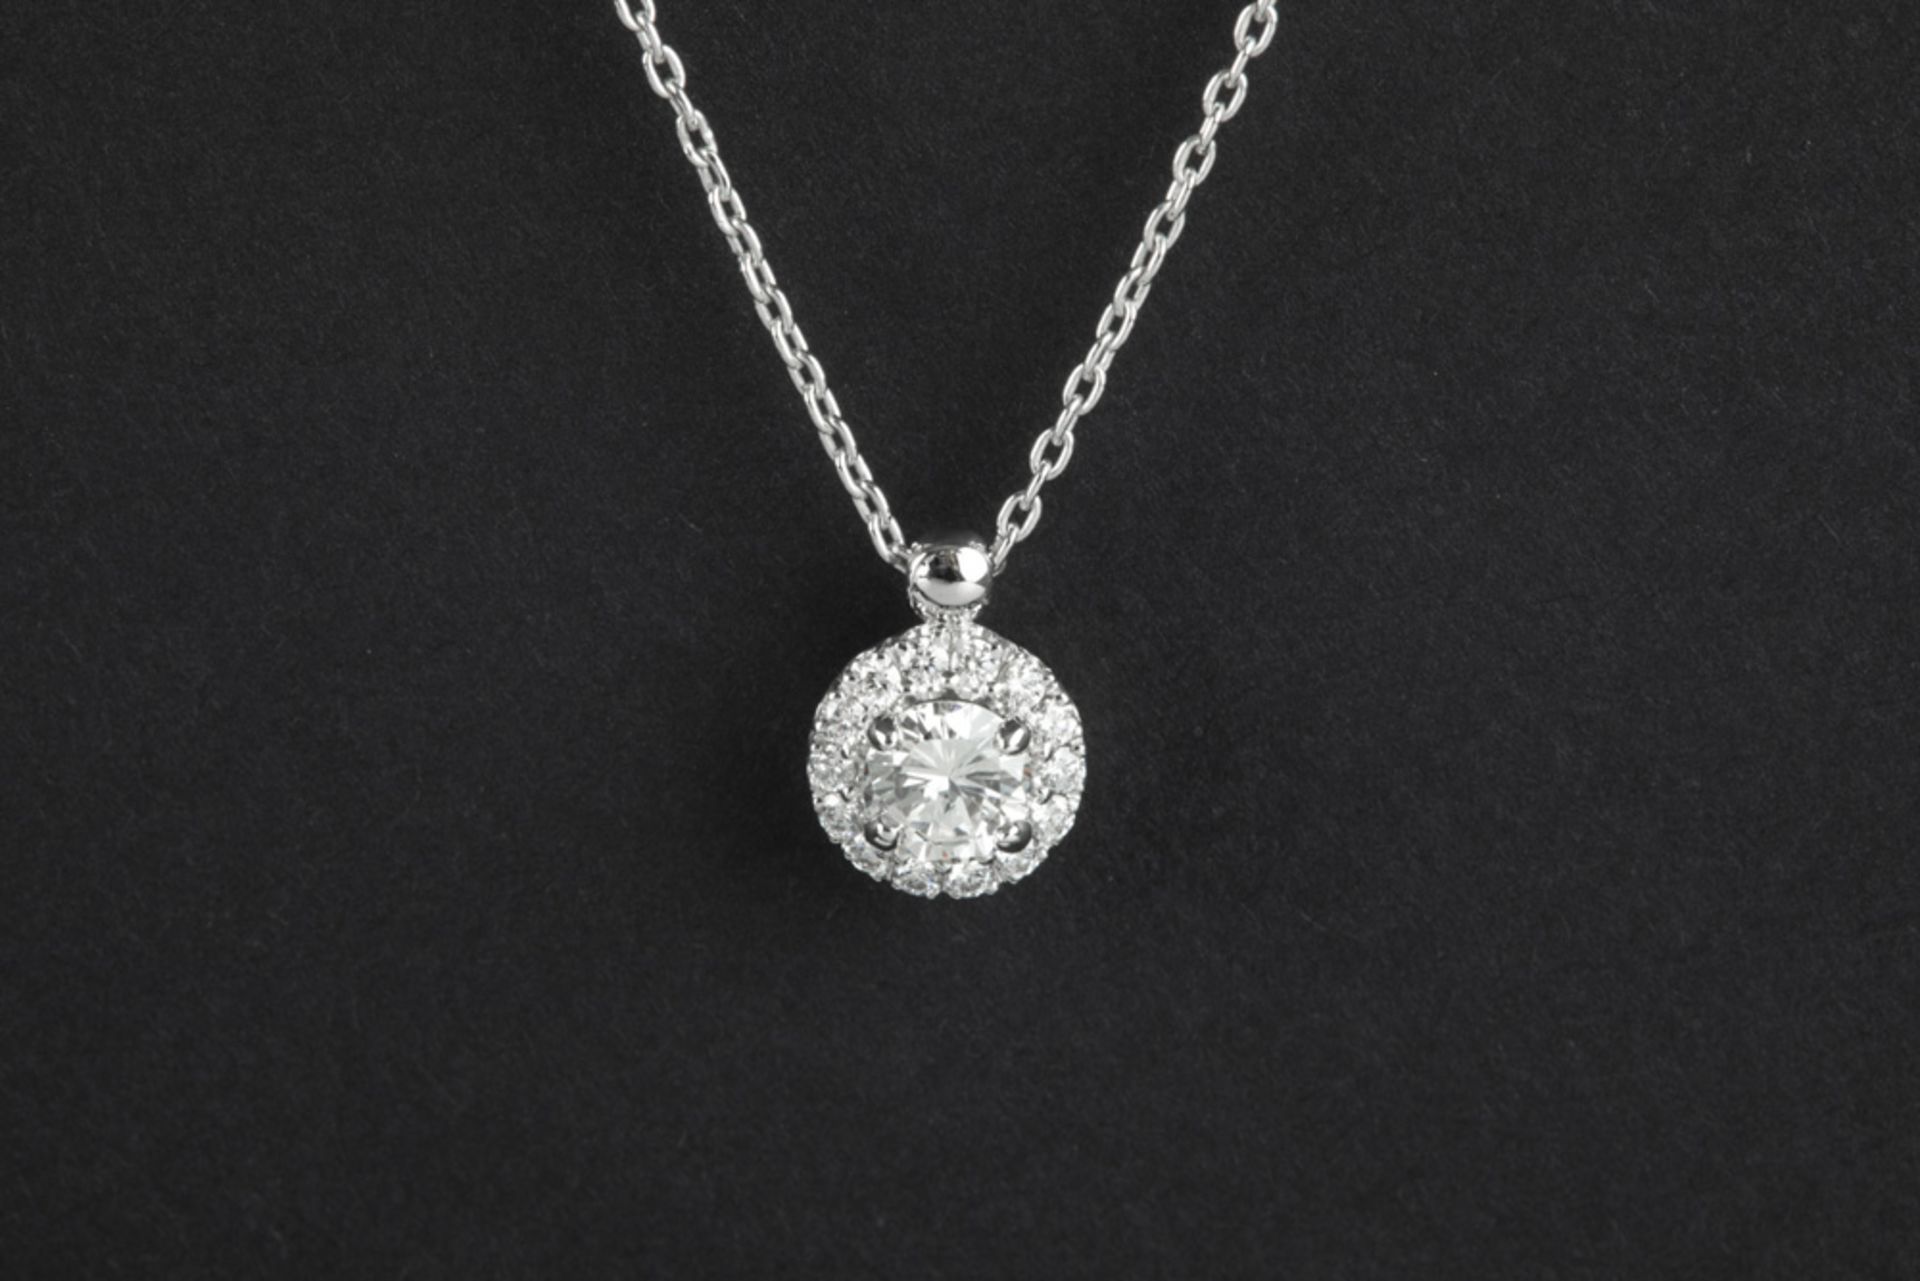 round pendant in white gold (18 carat) with a ca 0,30 carat high quality brilliant cut diamond